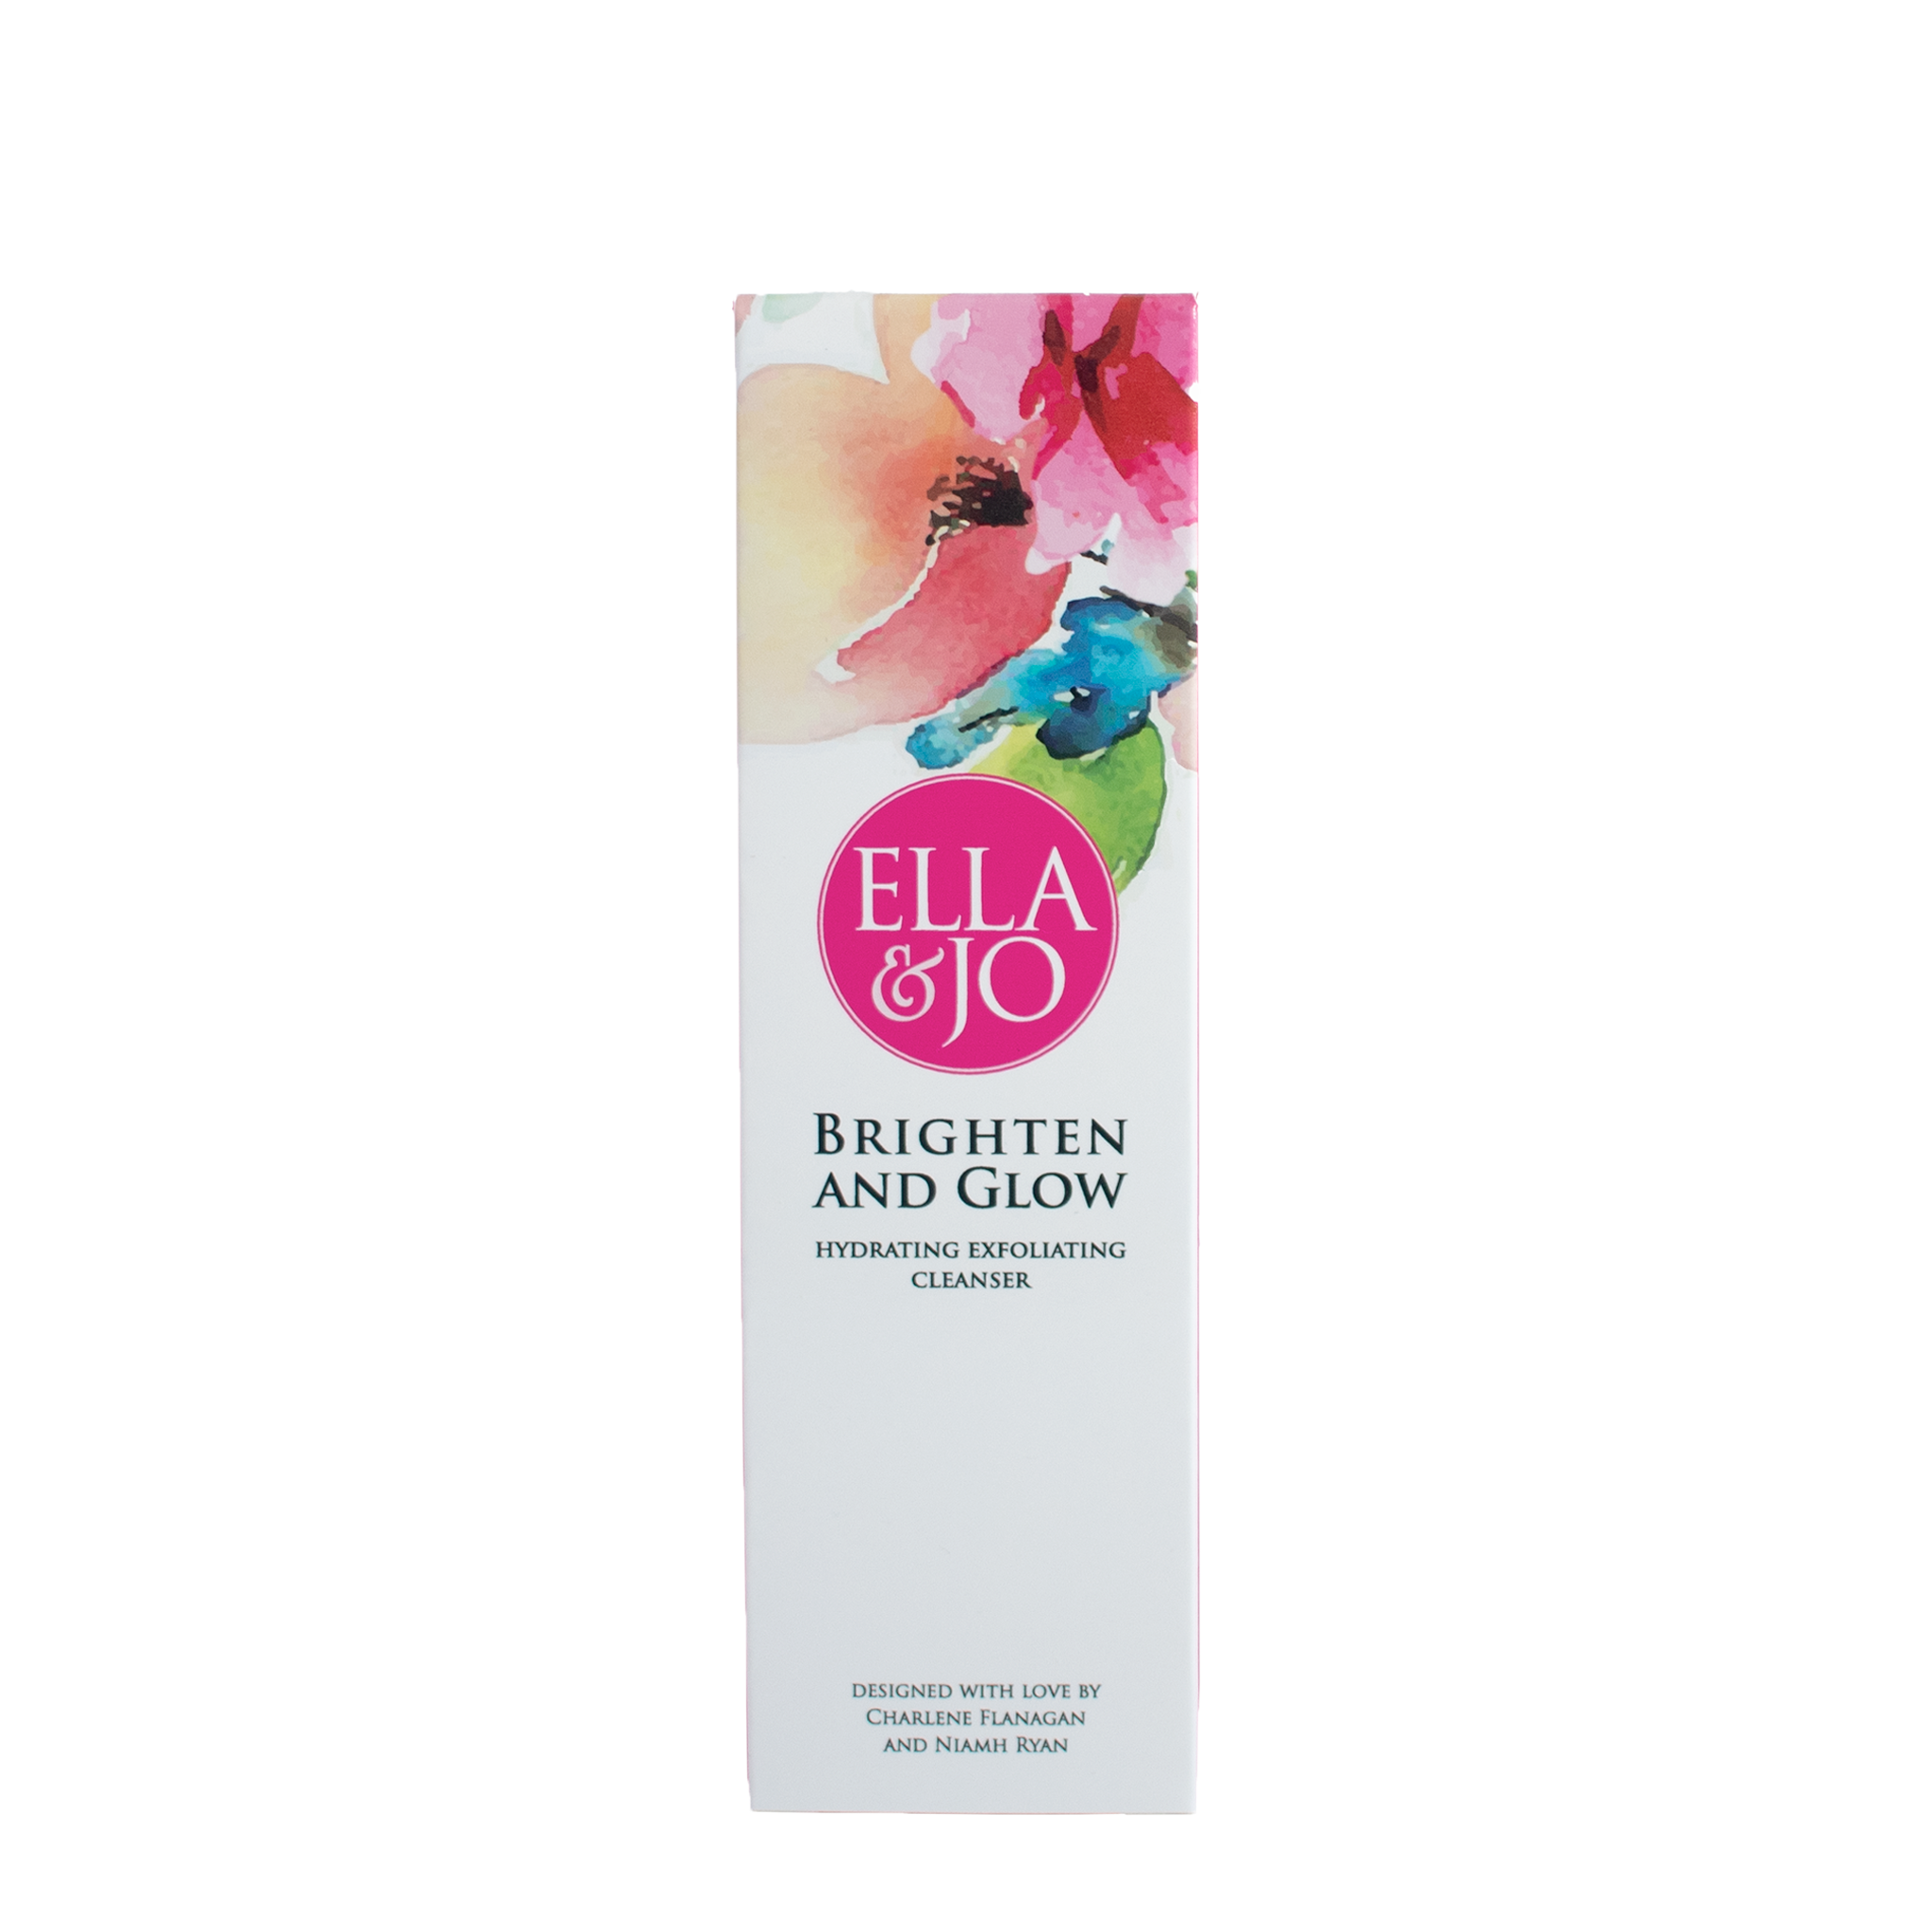 Brighten And Glow Hydrating Exfoliating Cleanser